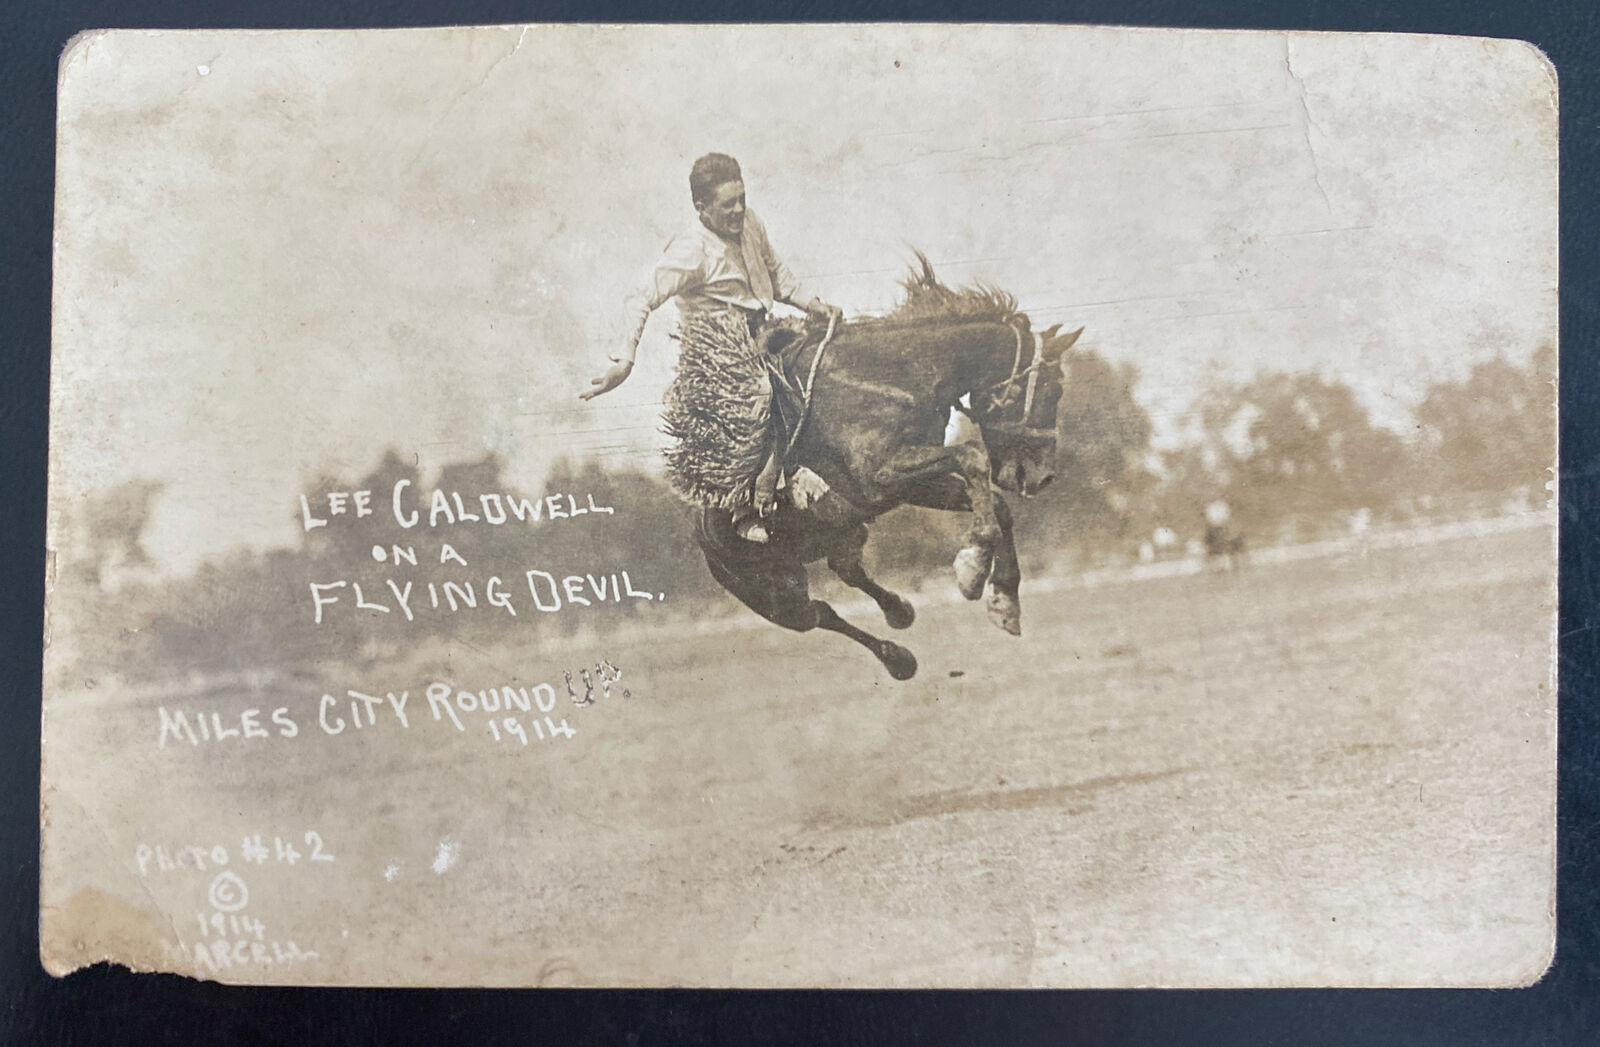 Mint USA RPPC Postcard Lee Caldwell On A Flying Devil Miles City Round 1914 Rode